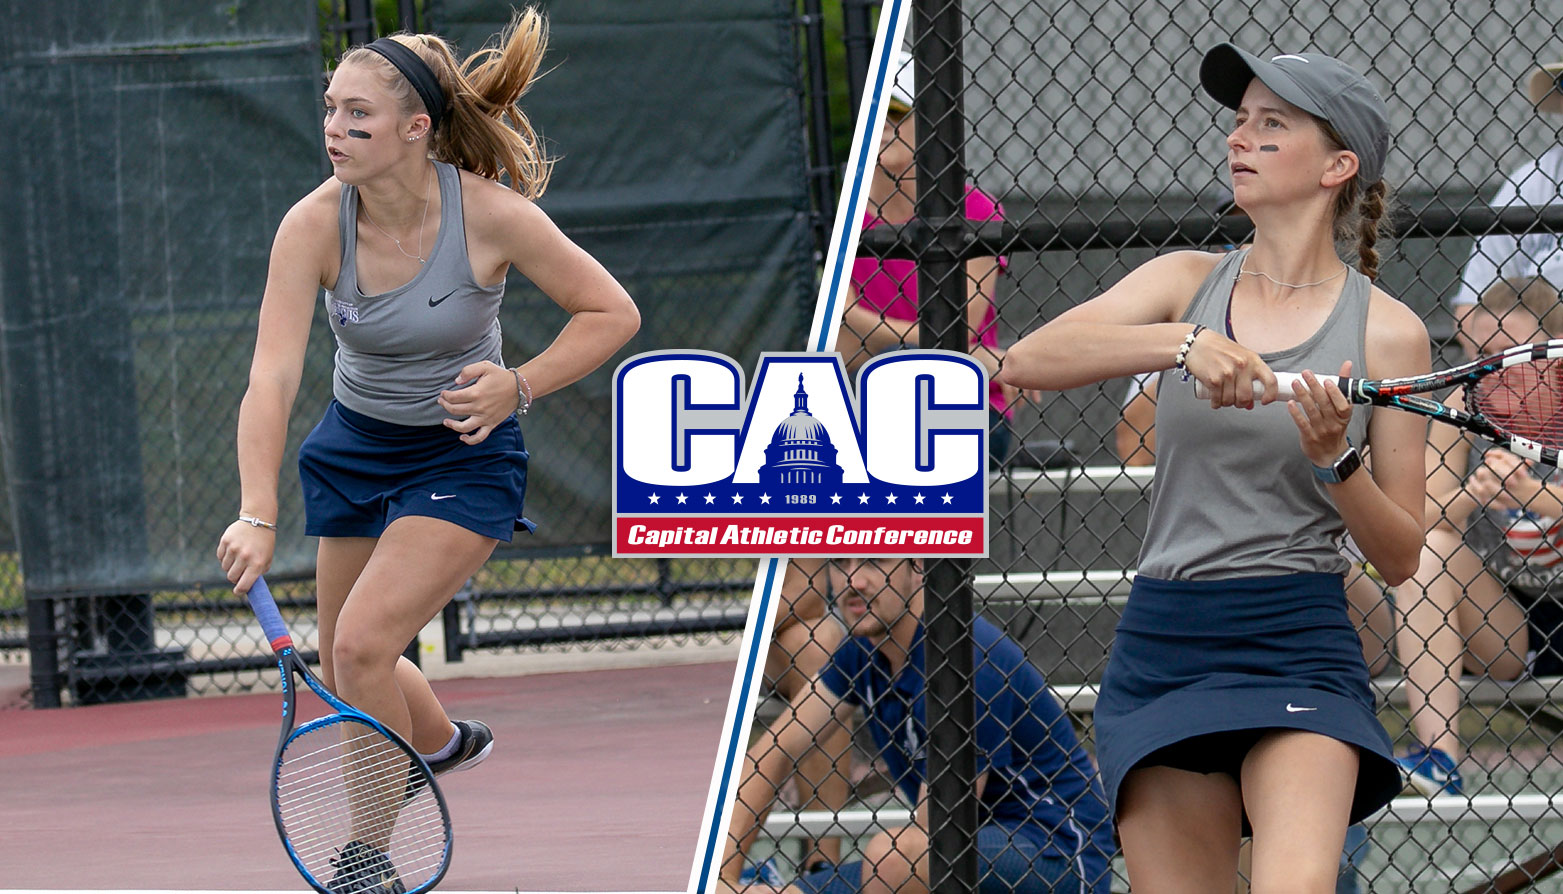 Mary Washington's Rachel Summers Named CAC Women's Tennis Player of the Year; Eagles Sweep Awards